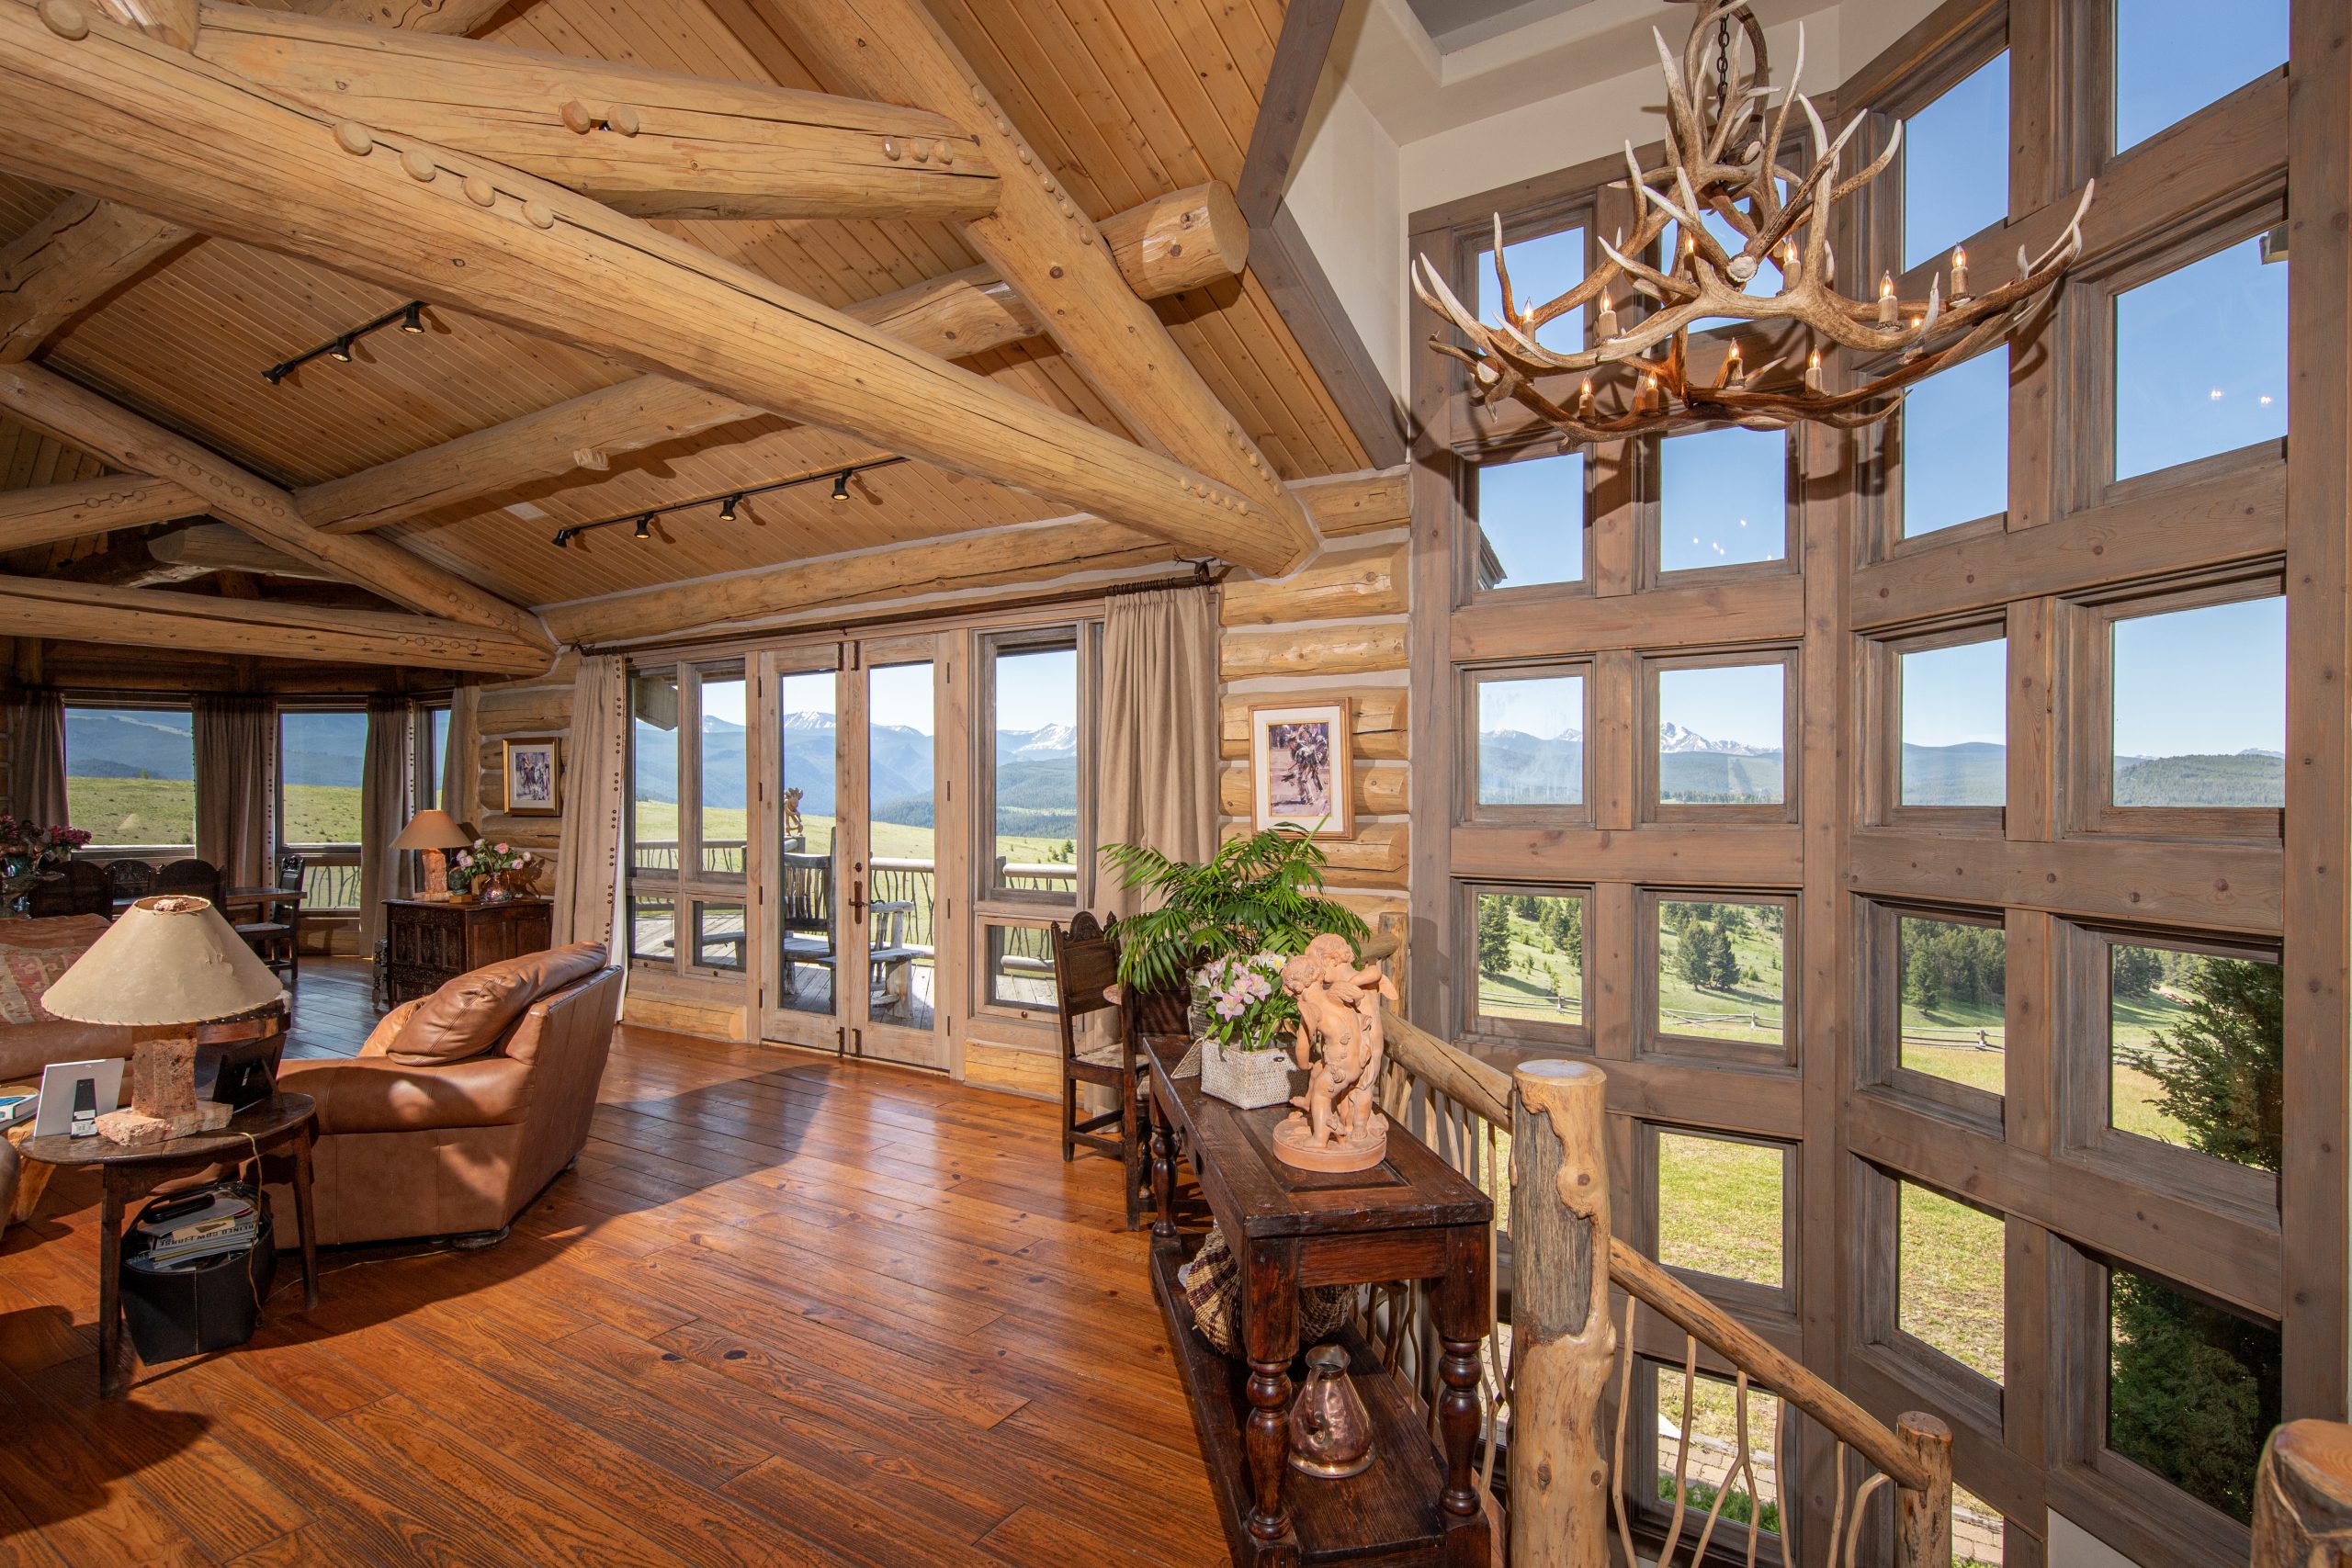 A view of the Montana mountains from the wood-paneled windows of Kokopelli Ranch's living room, furnished with a rustic style.